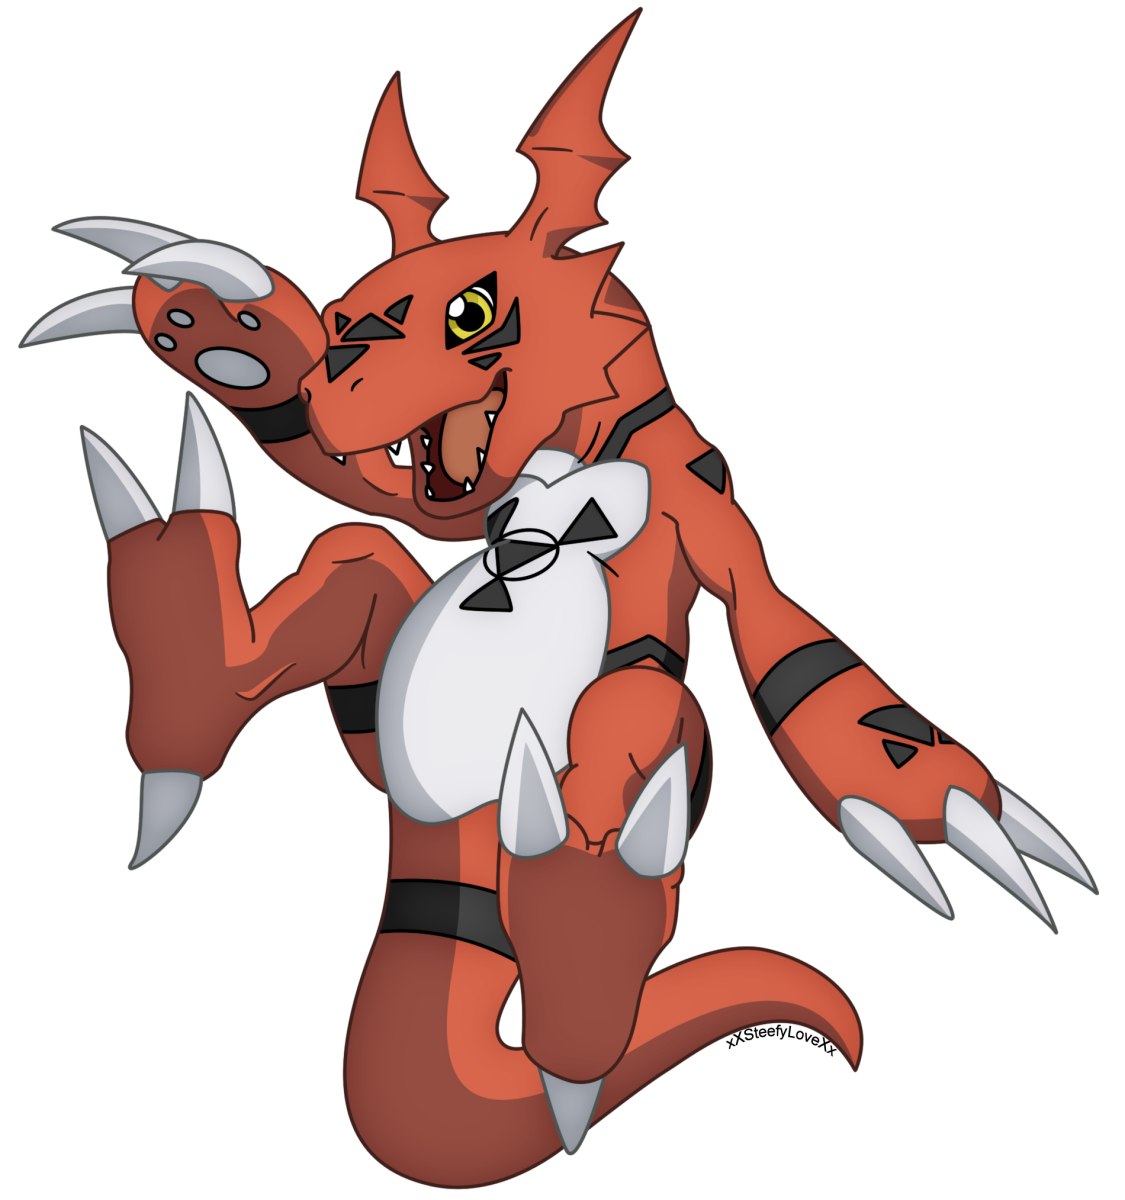 Discover the Power of Digimon Guilmon and Join the Digital Adventure Today!